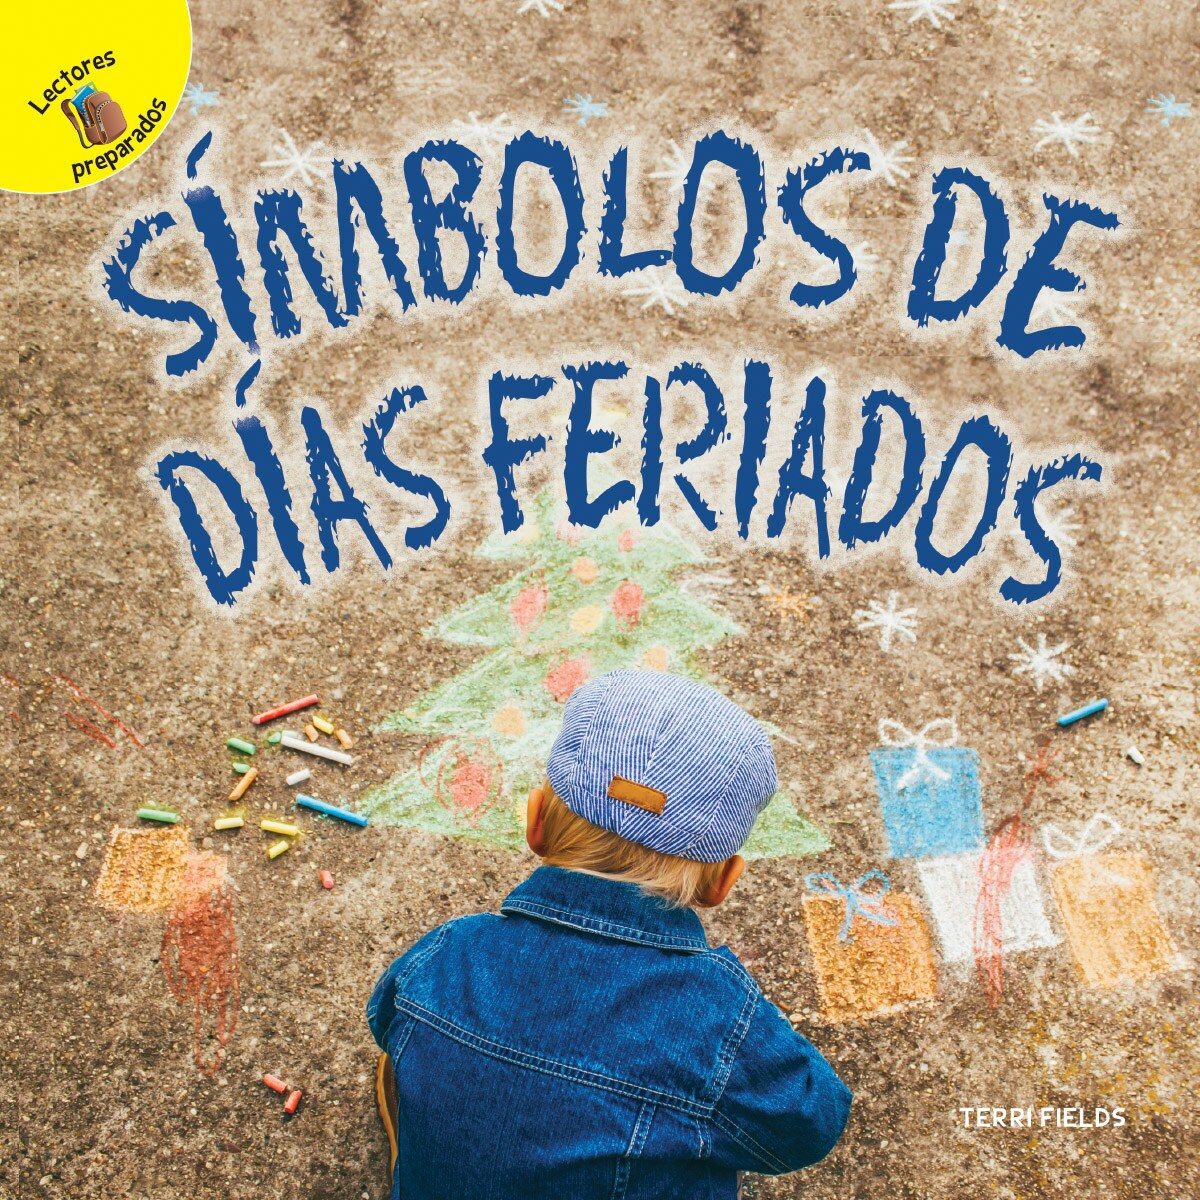 Rourke Educational Media S&#xED;mbolos de d&#xED;as feriados (Holiday Symbols) Spanish Children&#x27;s Book, Guided Reading Level E Reader